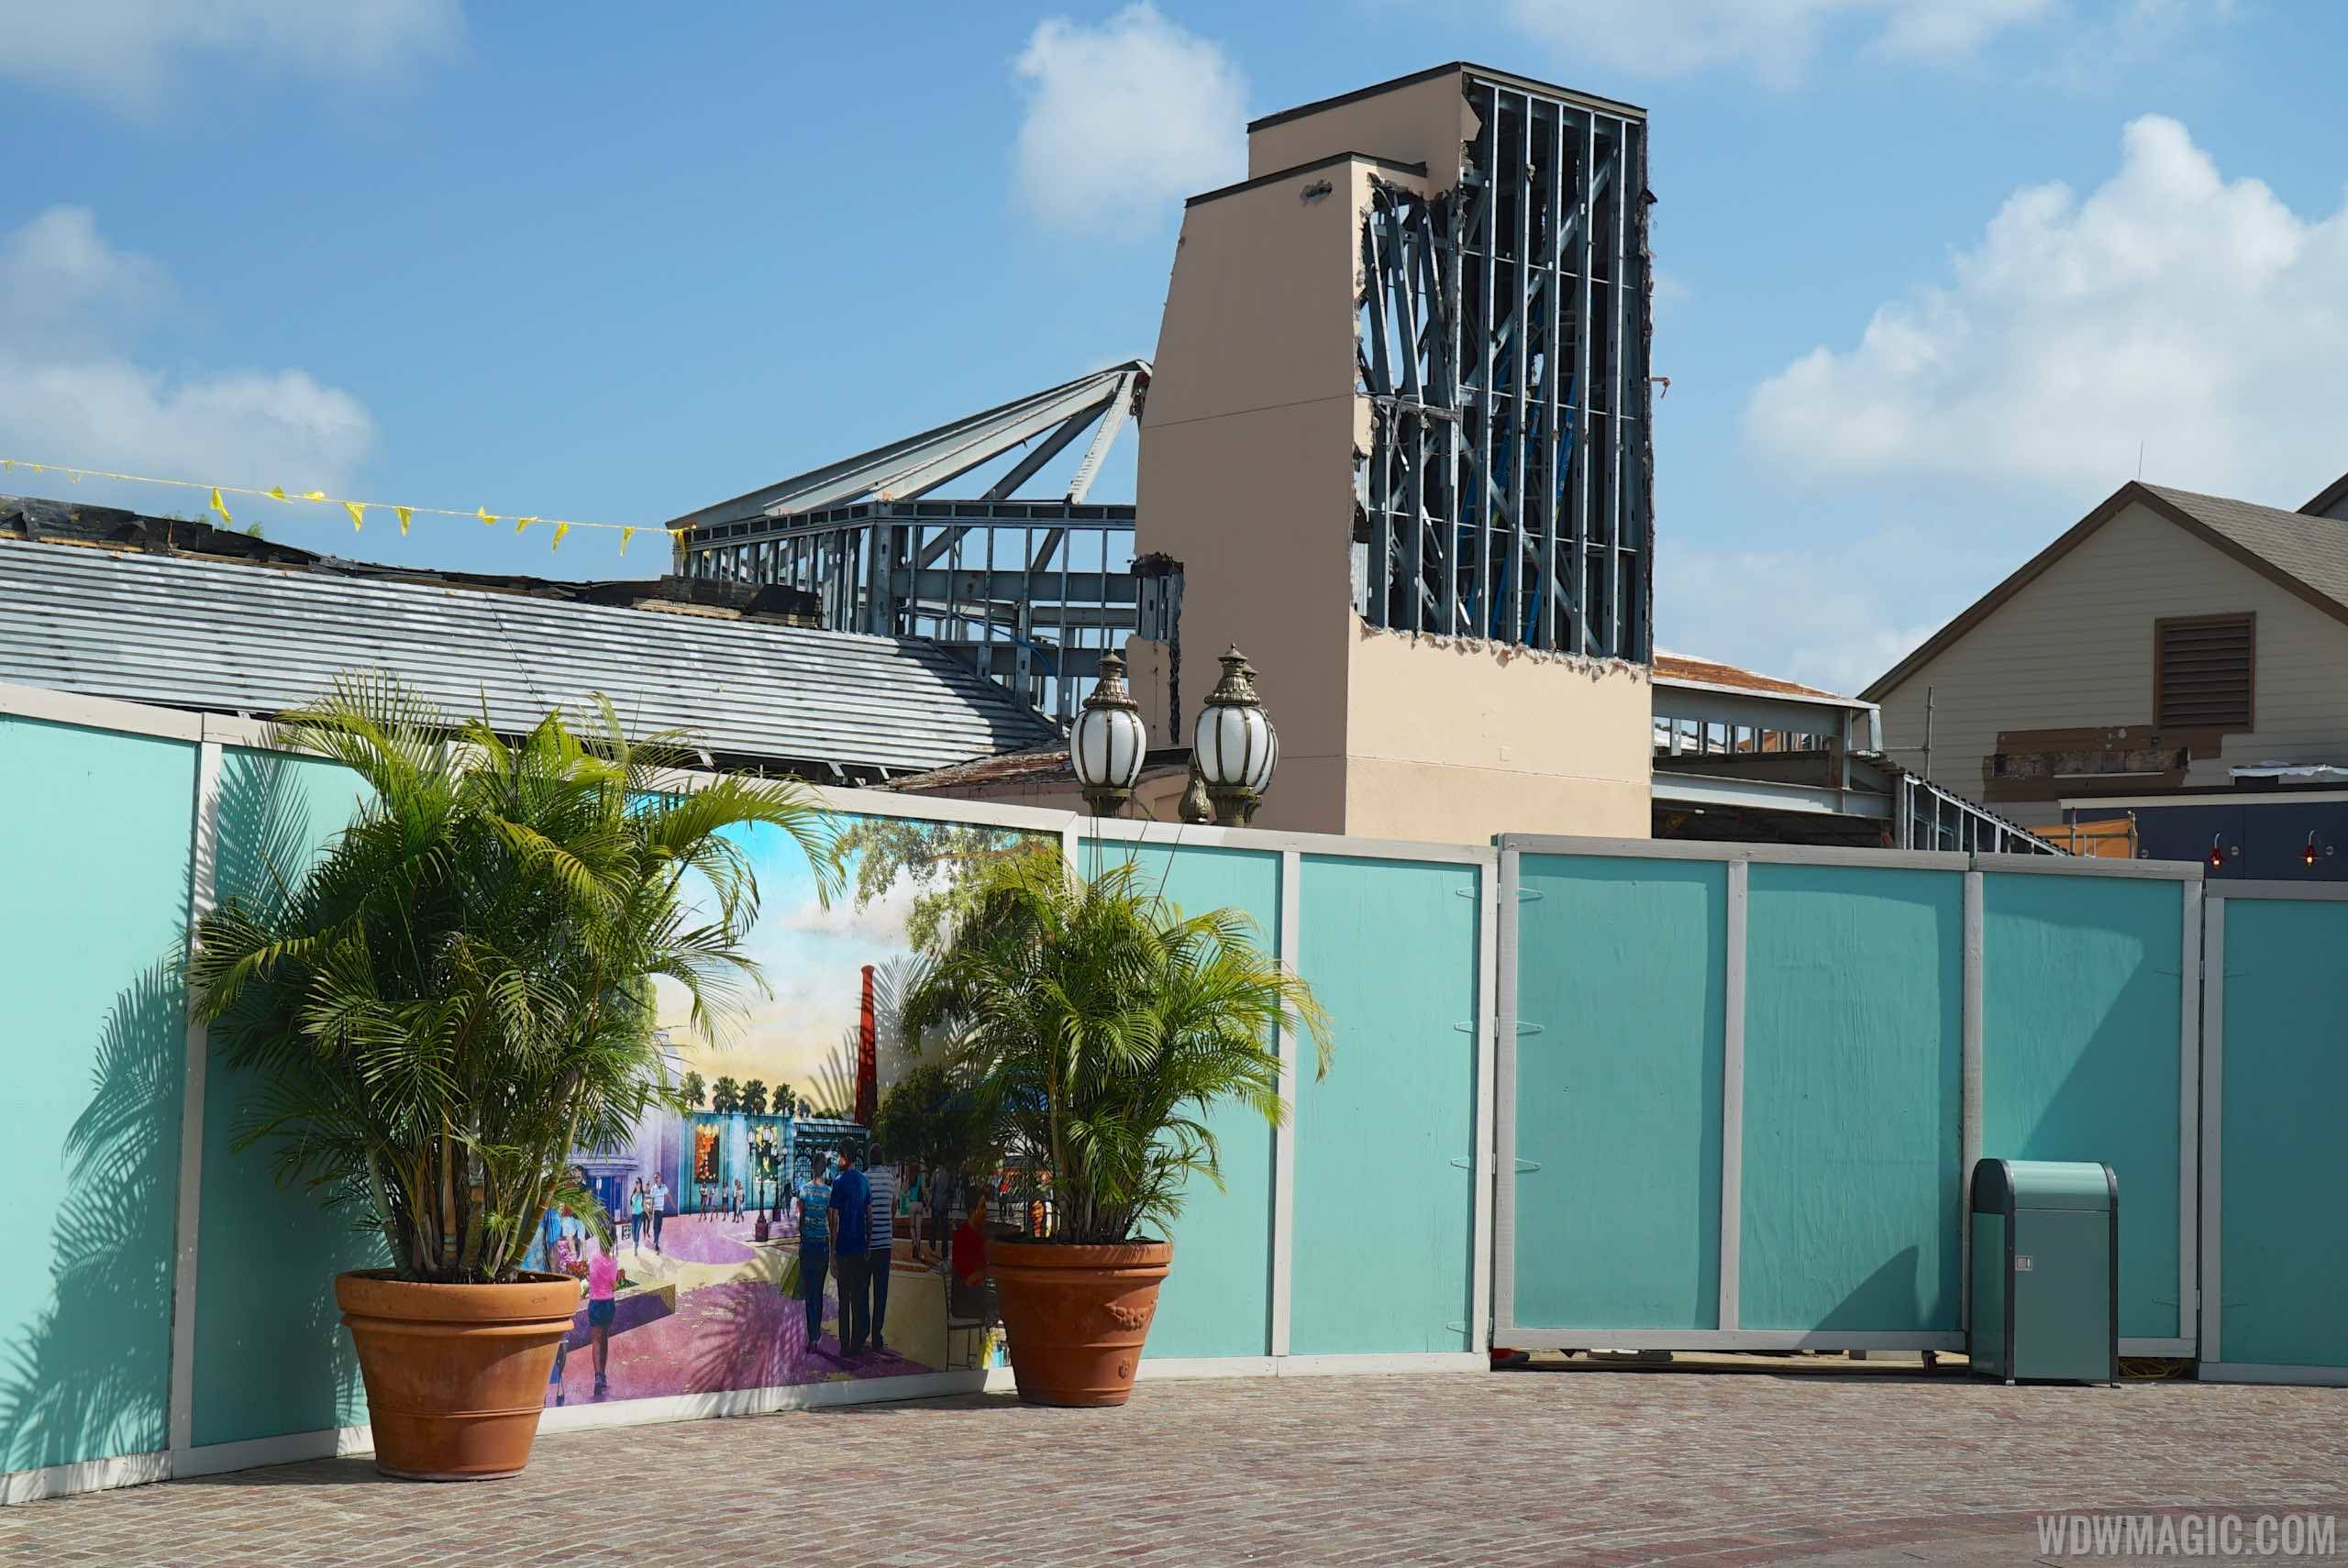 PHOTOS - Demolition of parts the former Adventurers Club ahead of construction for The Edison